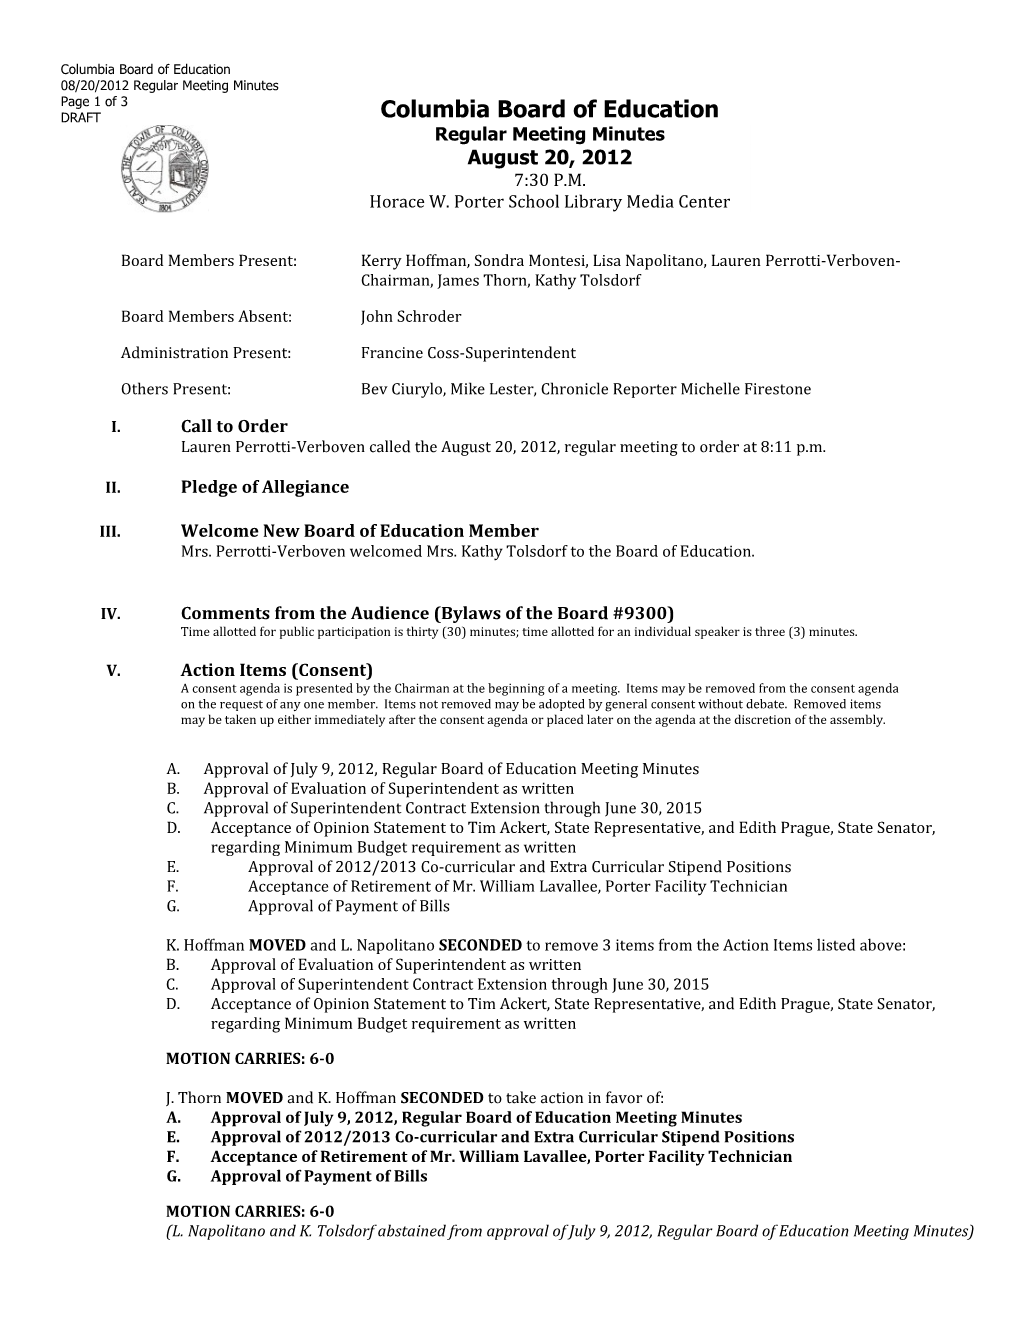 Columbia Board of Education 08/20/2012 Regular Meeting Minutes Page 1 of 3 DRAFT